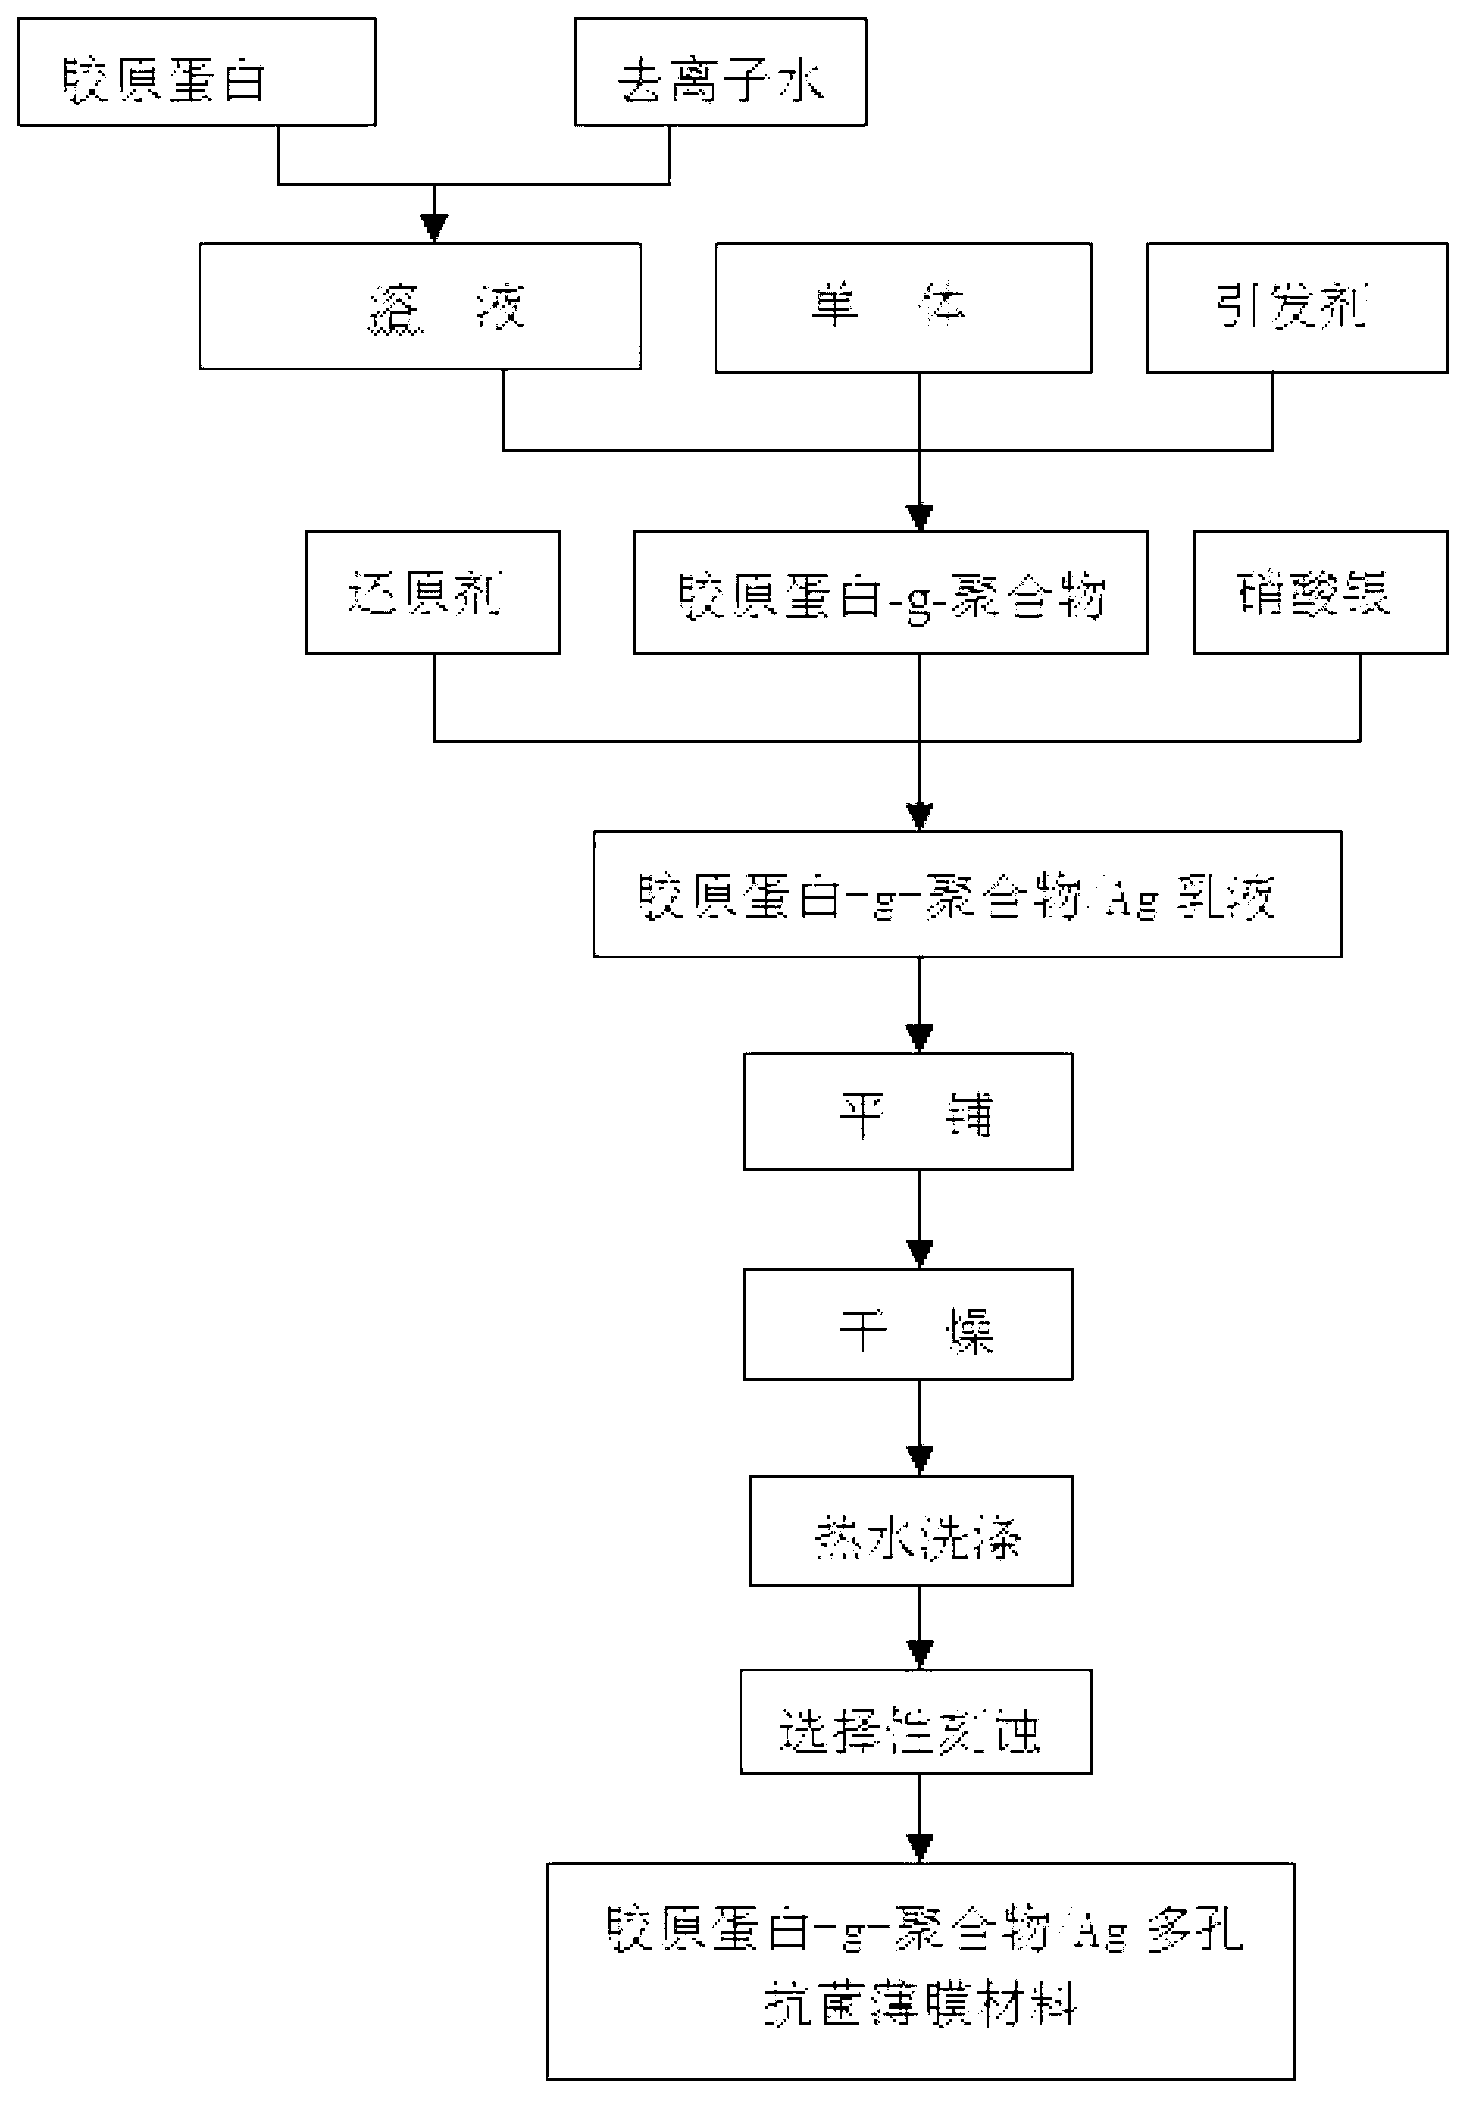 Collagen-g-polymer/Ag multi-hole nano antibacterial film material and preparation method thereof